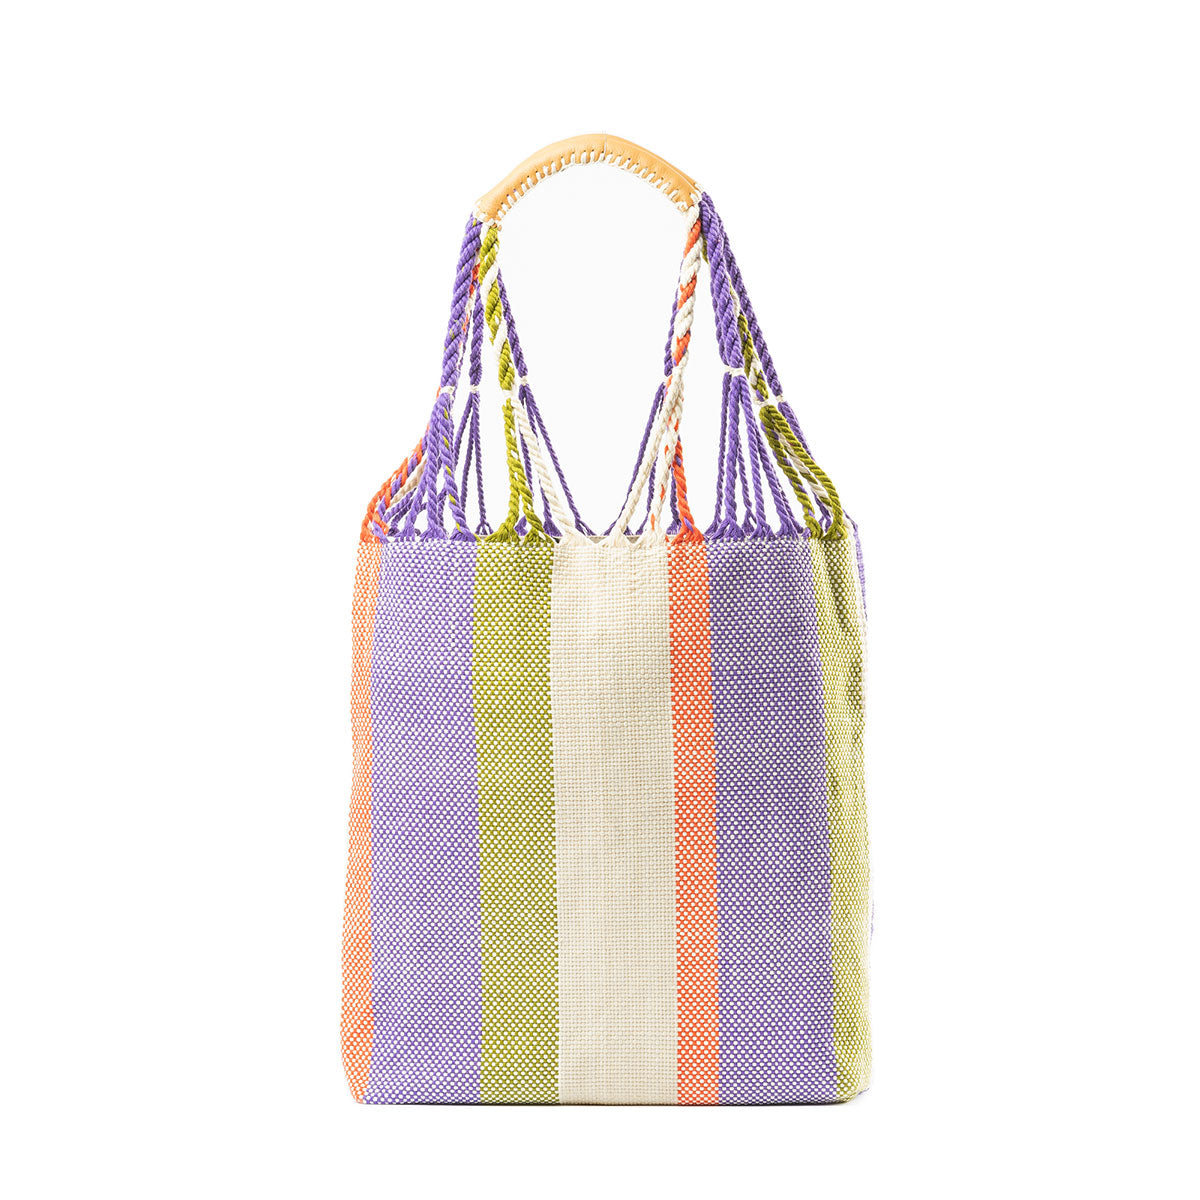 Apolonia Tote Prism Basket Weave. The bag has cords attached to the leather handles. The Prism pattern has woven orange, purple, and green stripes.